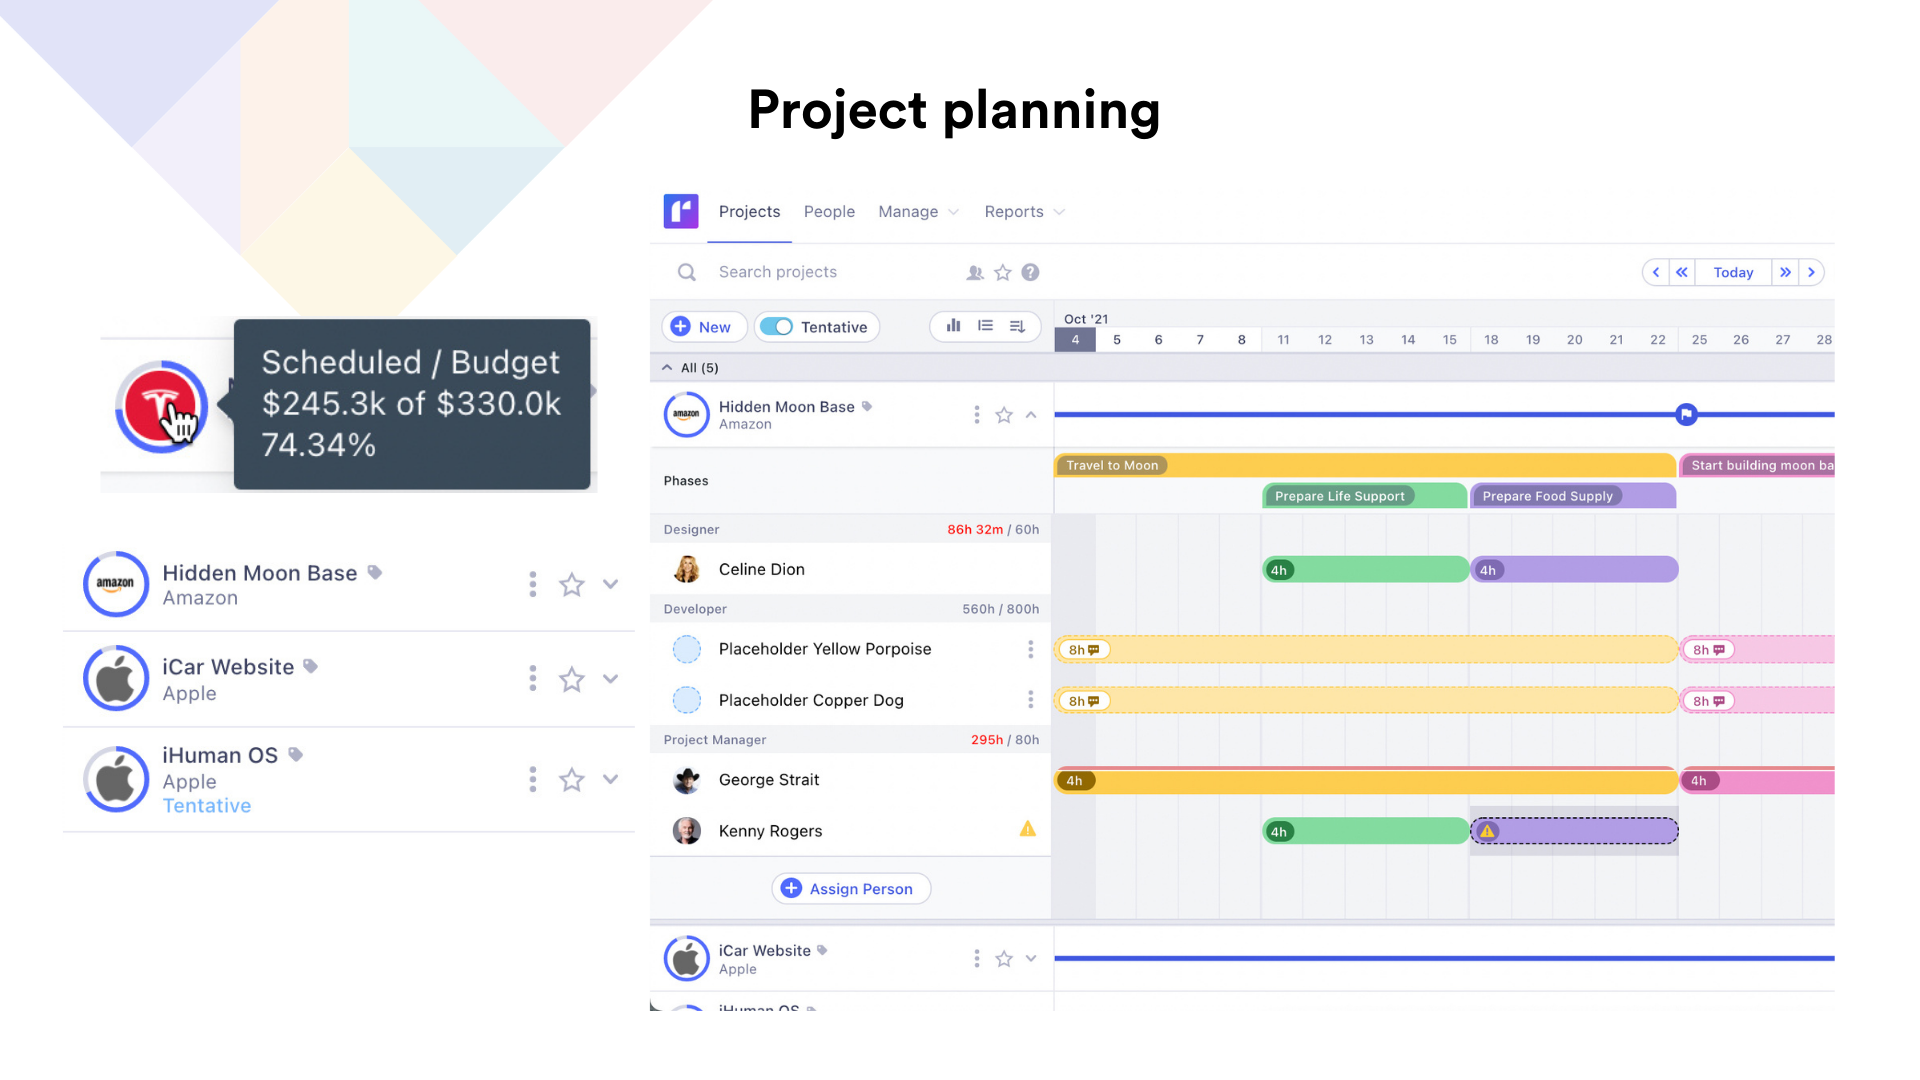 Runn Software - Stay on top of changing projects, plan projects with your budget in mind, and add tentative projects.